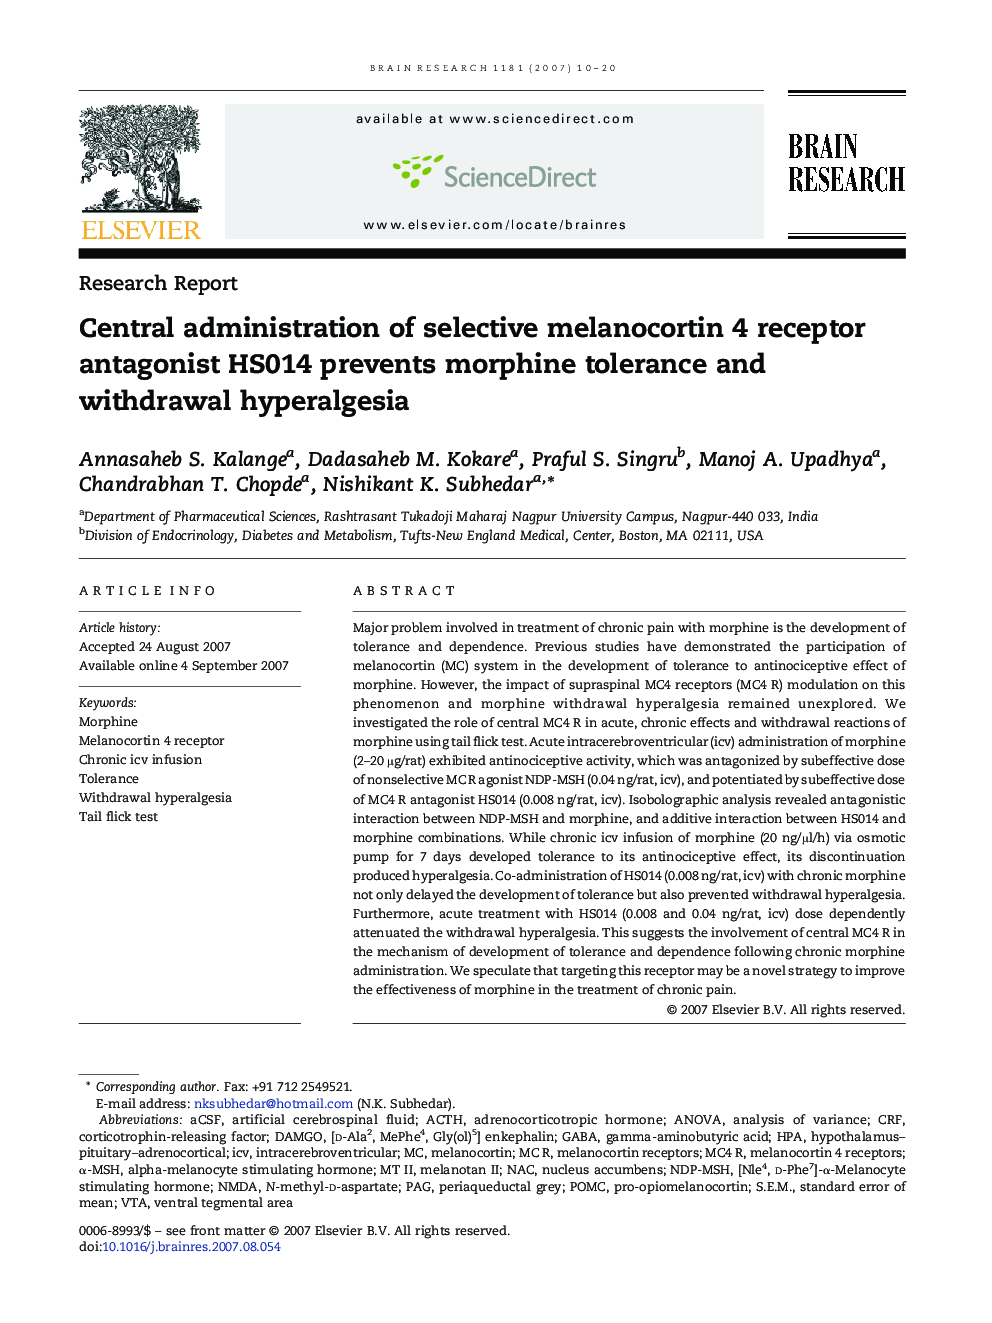 Central administration of selective melanocortin 4 receptor antagonist HS014 prevents morphine tolerance and withdrawal hyperalgesia